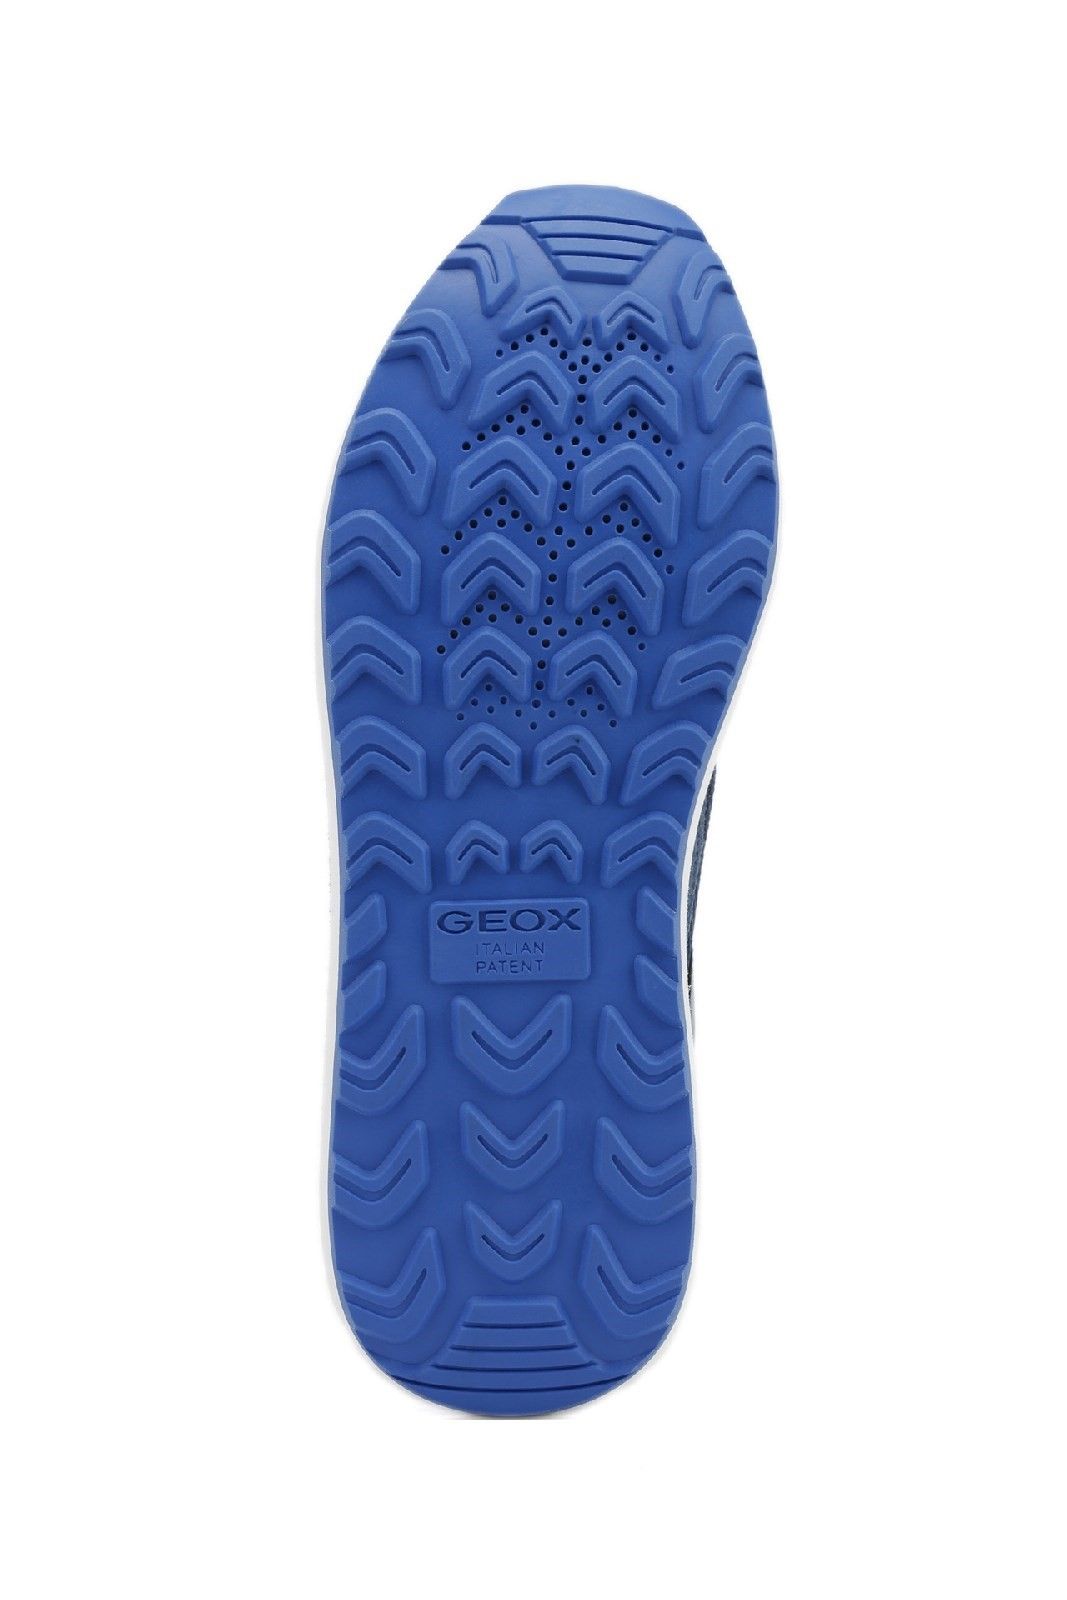 The Geox rubber sole is based on an exclusive patent: the combination of the perforated sole and the breathable and waterproof membrane allow natural temperature regulation, creating the perfect micro-climate that keeps feet dry and comfortable.Exclusive Technology. 
Perforated footbed. 
360 Degree breathability.